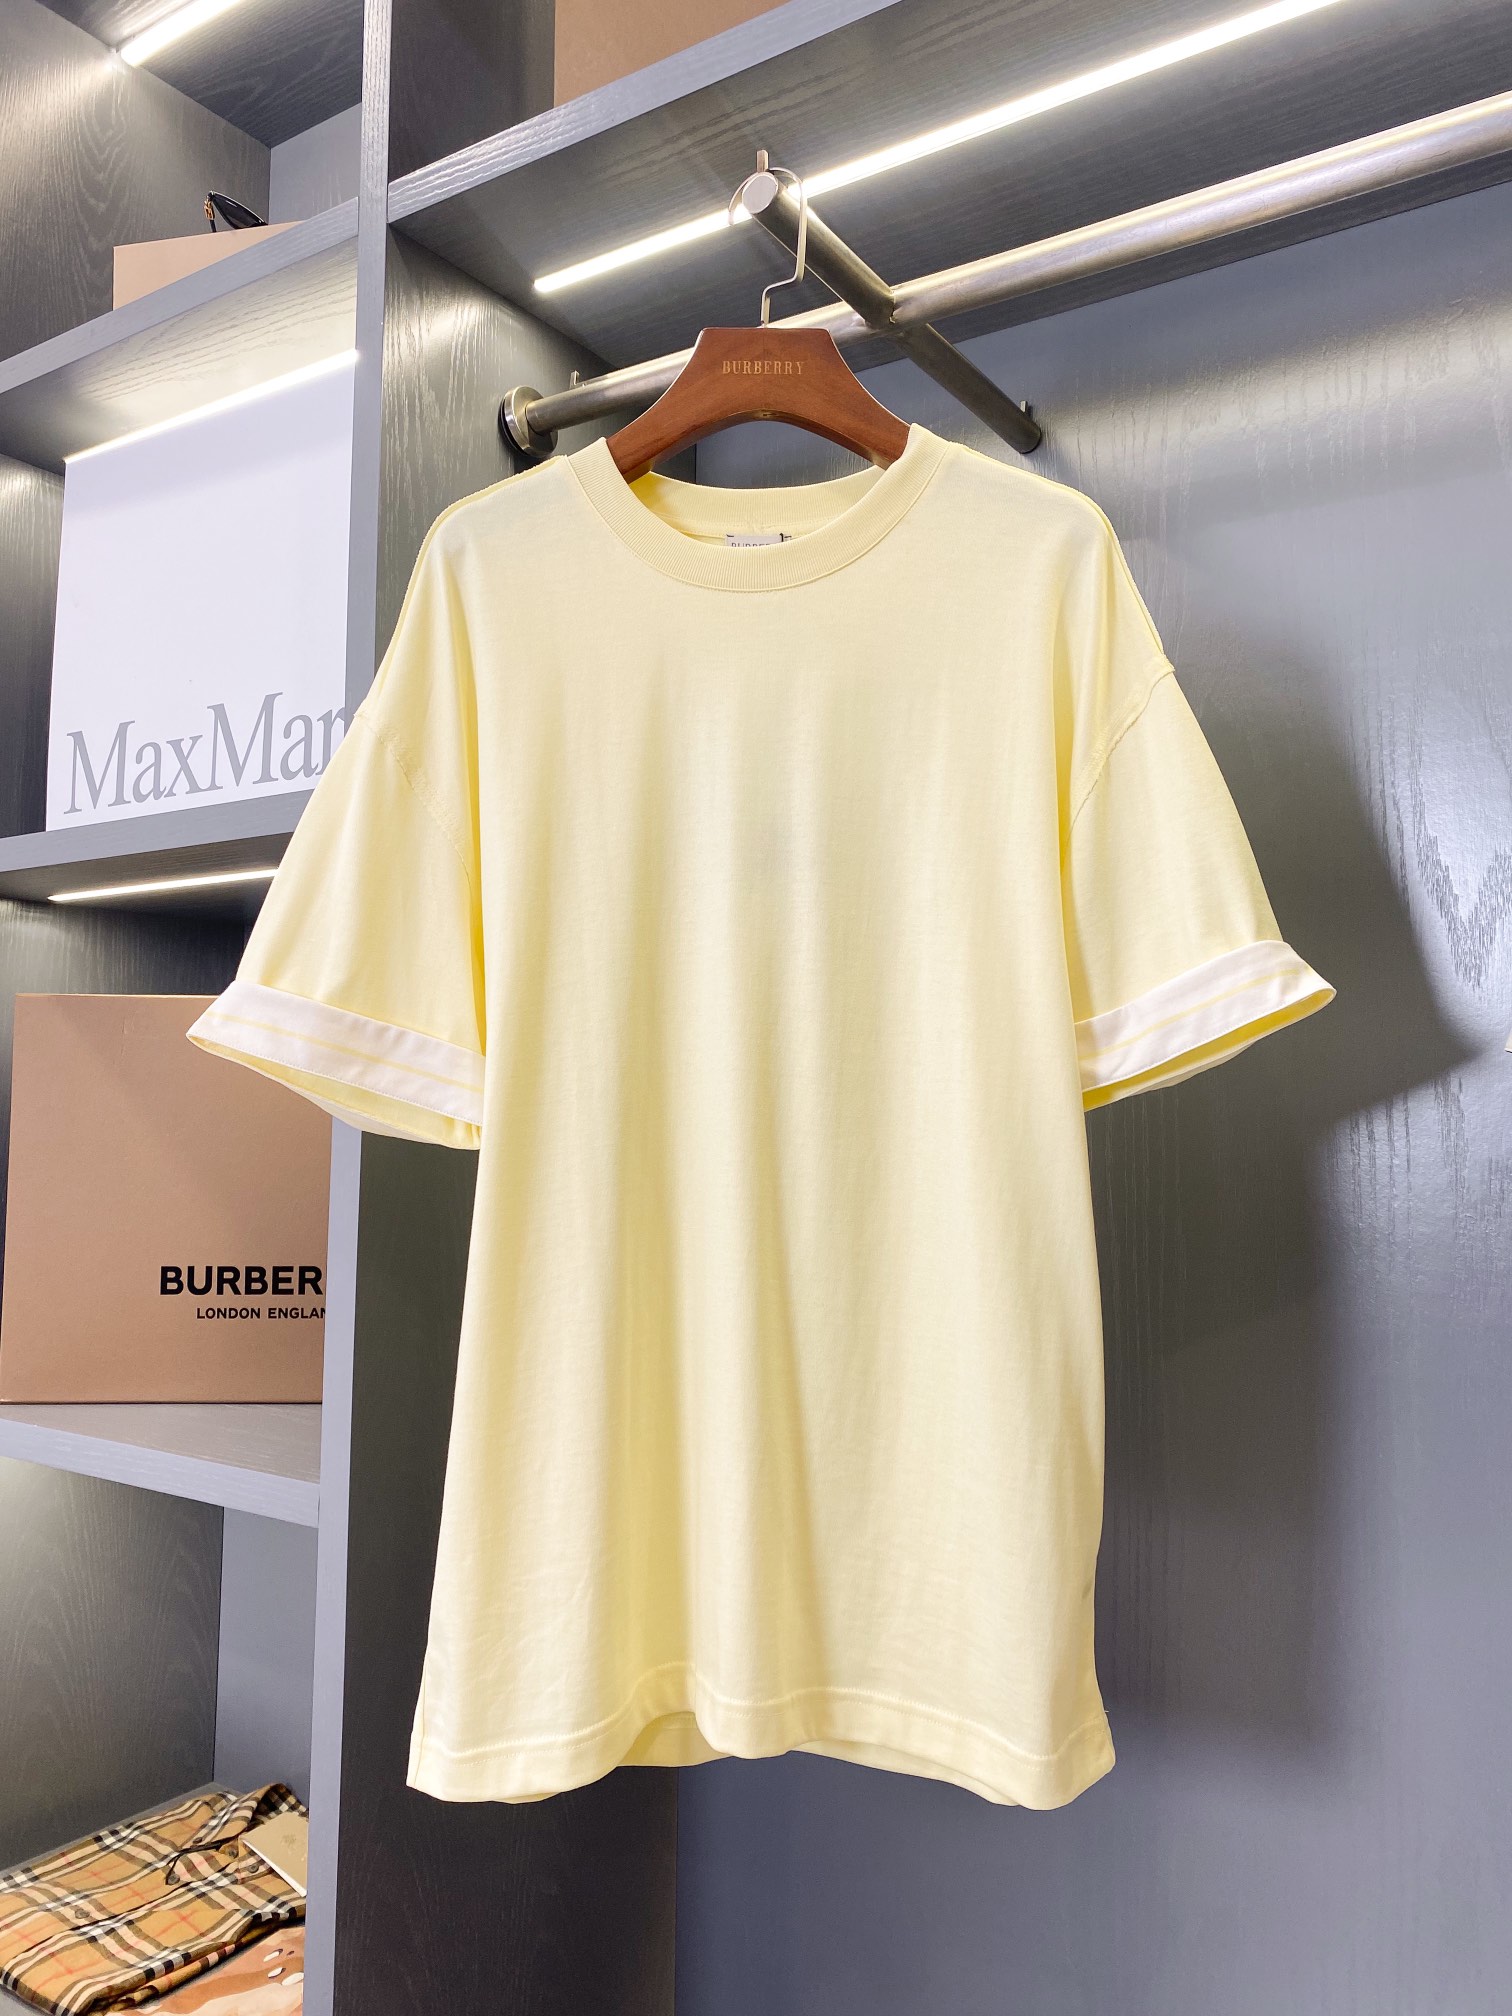 Burberry Clothing T-Shirt Printing Unisex Cotton Knitting Spring/Summer Collection Fashion Short Sleeve